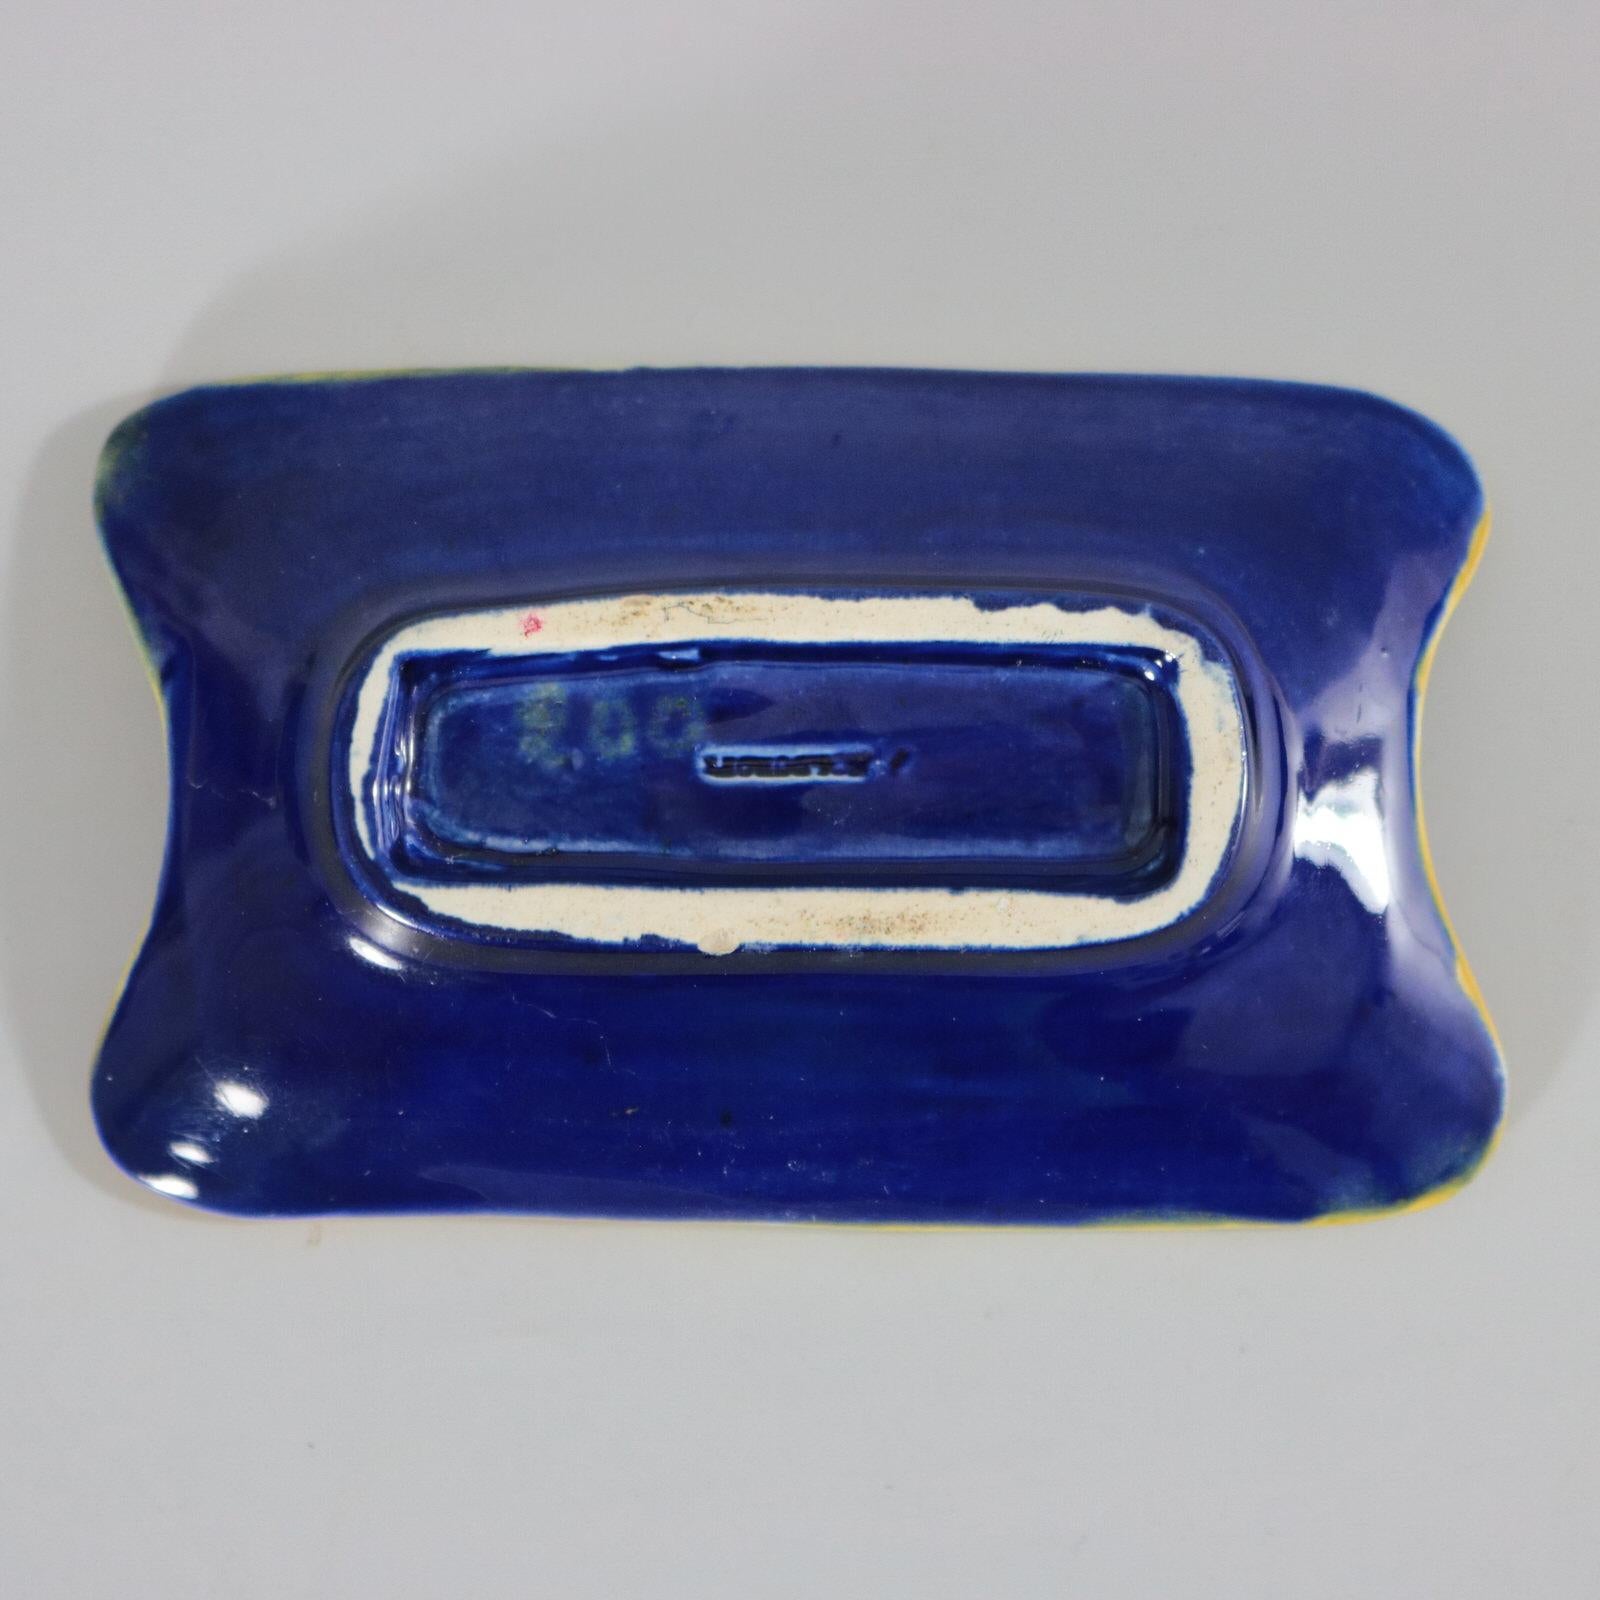 Holdcroft Majolica pin tray which features a flowering thorny twig on each corner. Colouration: cobalt blue, yellow, white, are predominant. The piece bears maker's marks for the Holdcroft pottery.